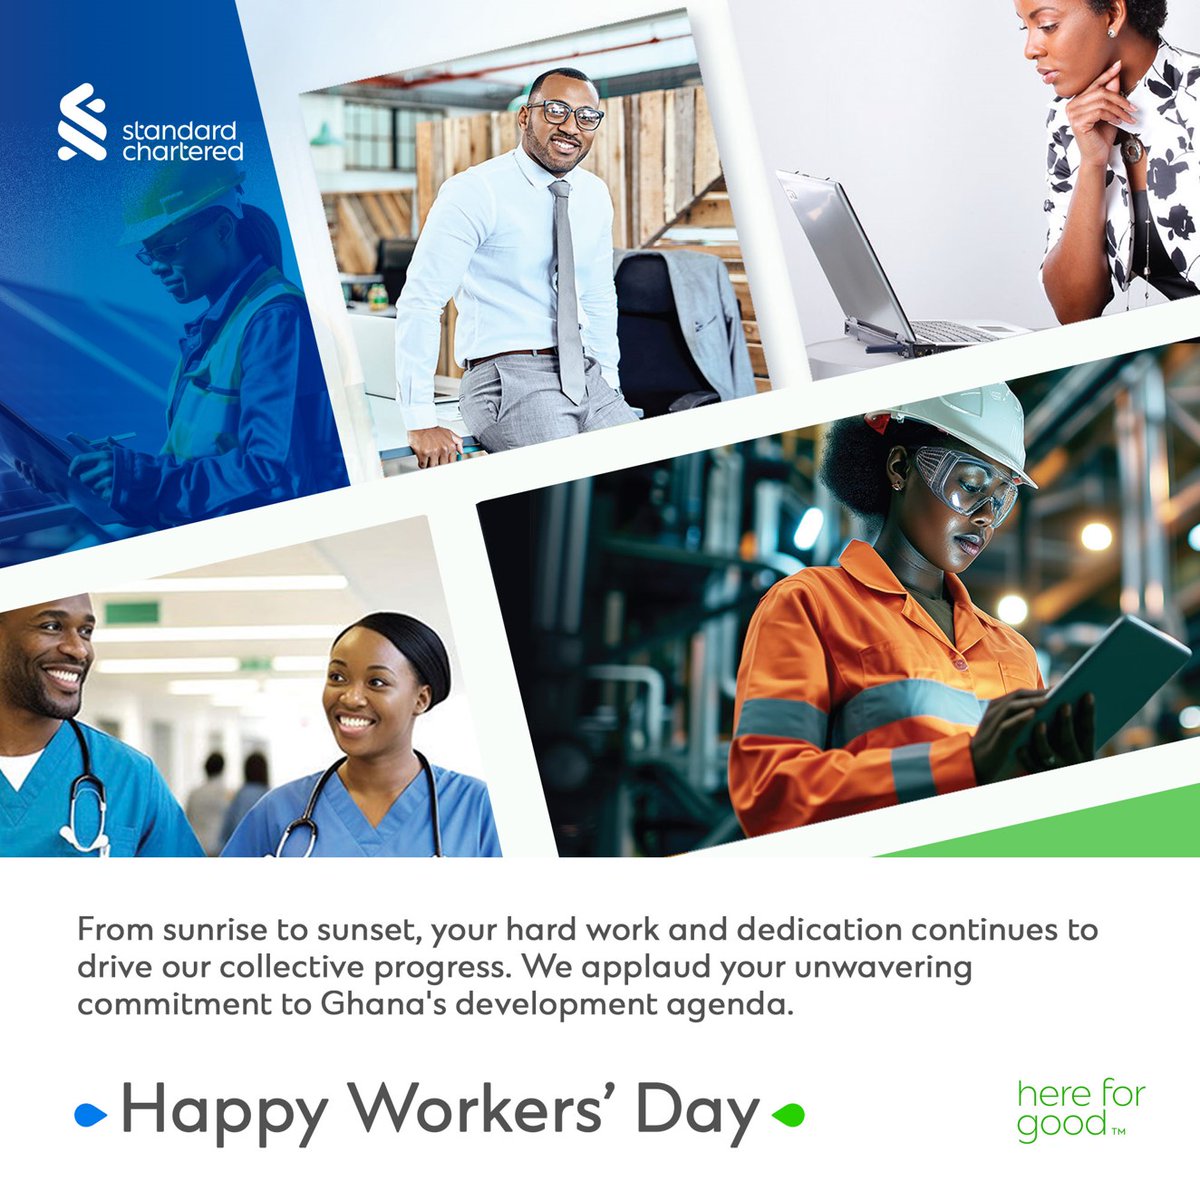 Embrace May Day and reward yourself for all your hard work. Dive into the activities you adore from sunrise until sunset; knowing your dedication fuels our shared journey forward. Happy May Day! #StanChartGhana #HappyWorkersDay